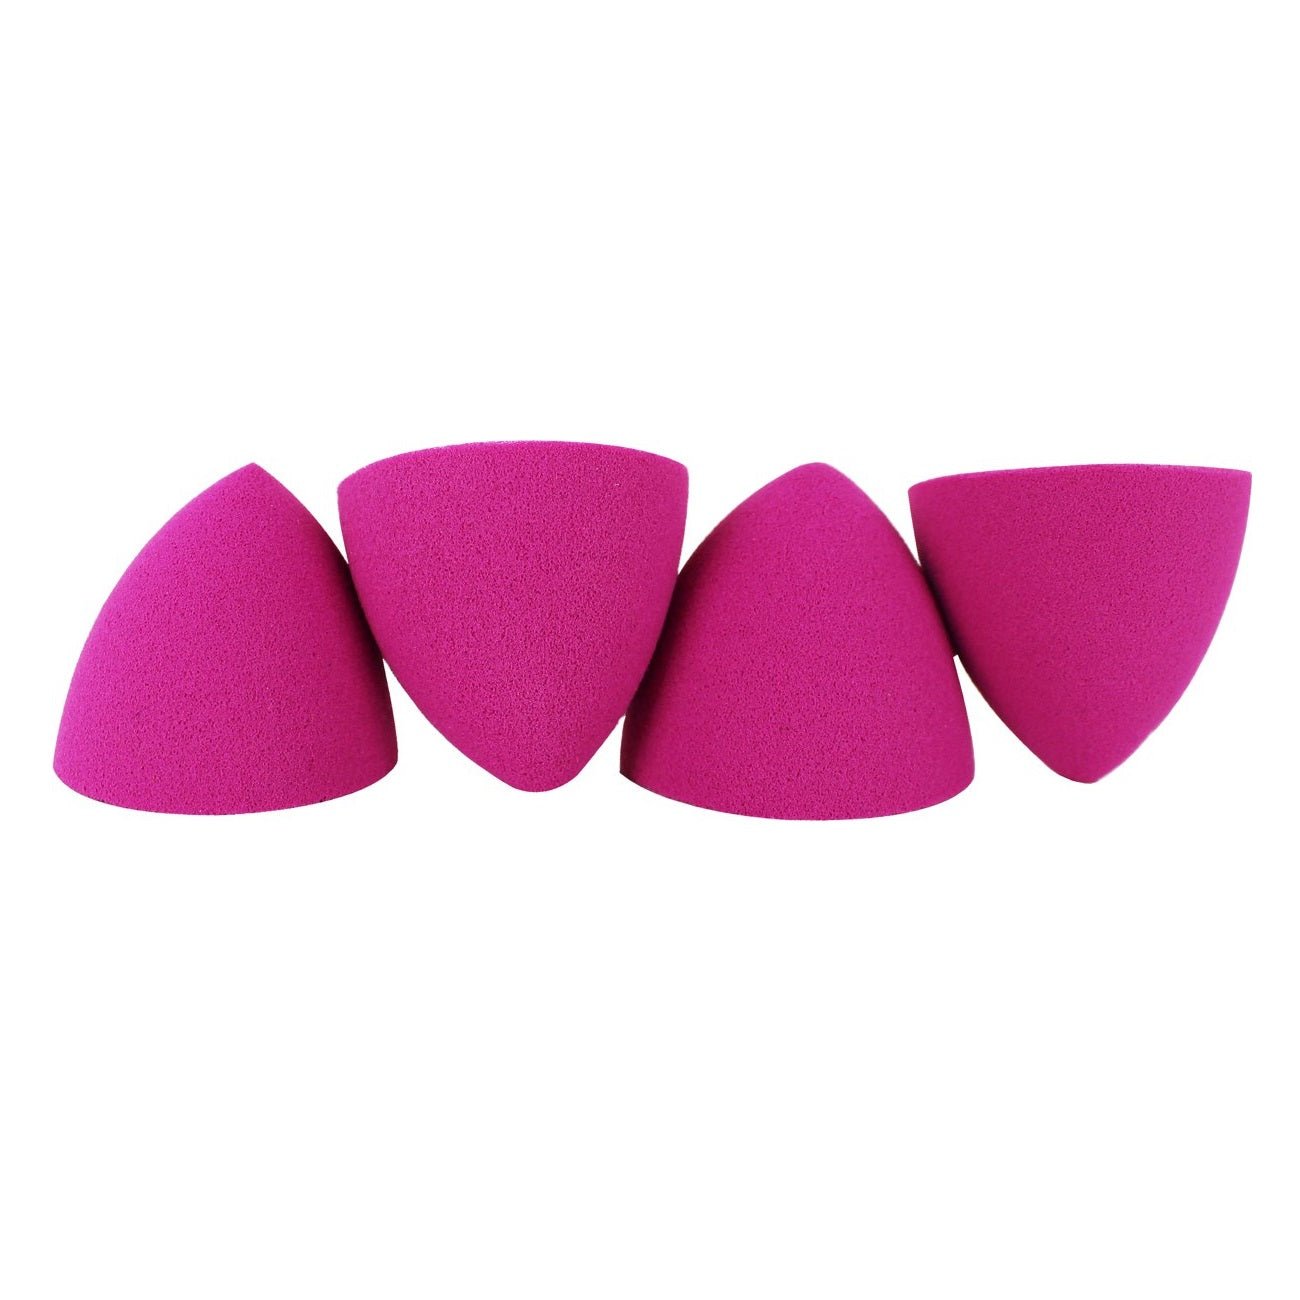 Real Techniques 4 Miracle Contour Wedges Finish Make-Up Sponge Set - LookincredibleReal Techniques79625014884